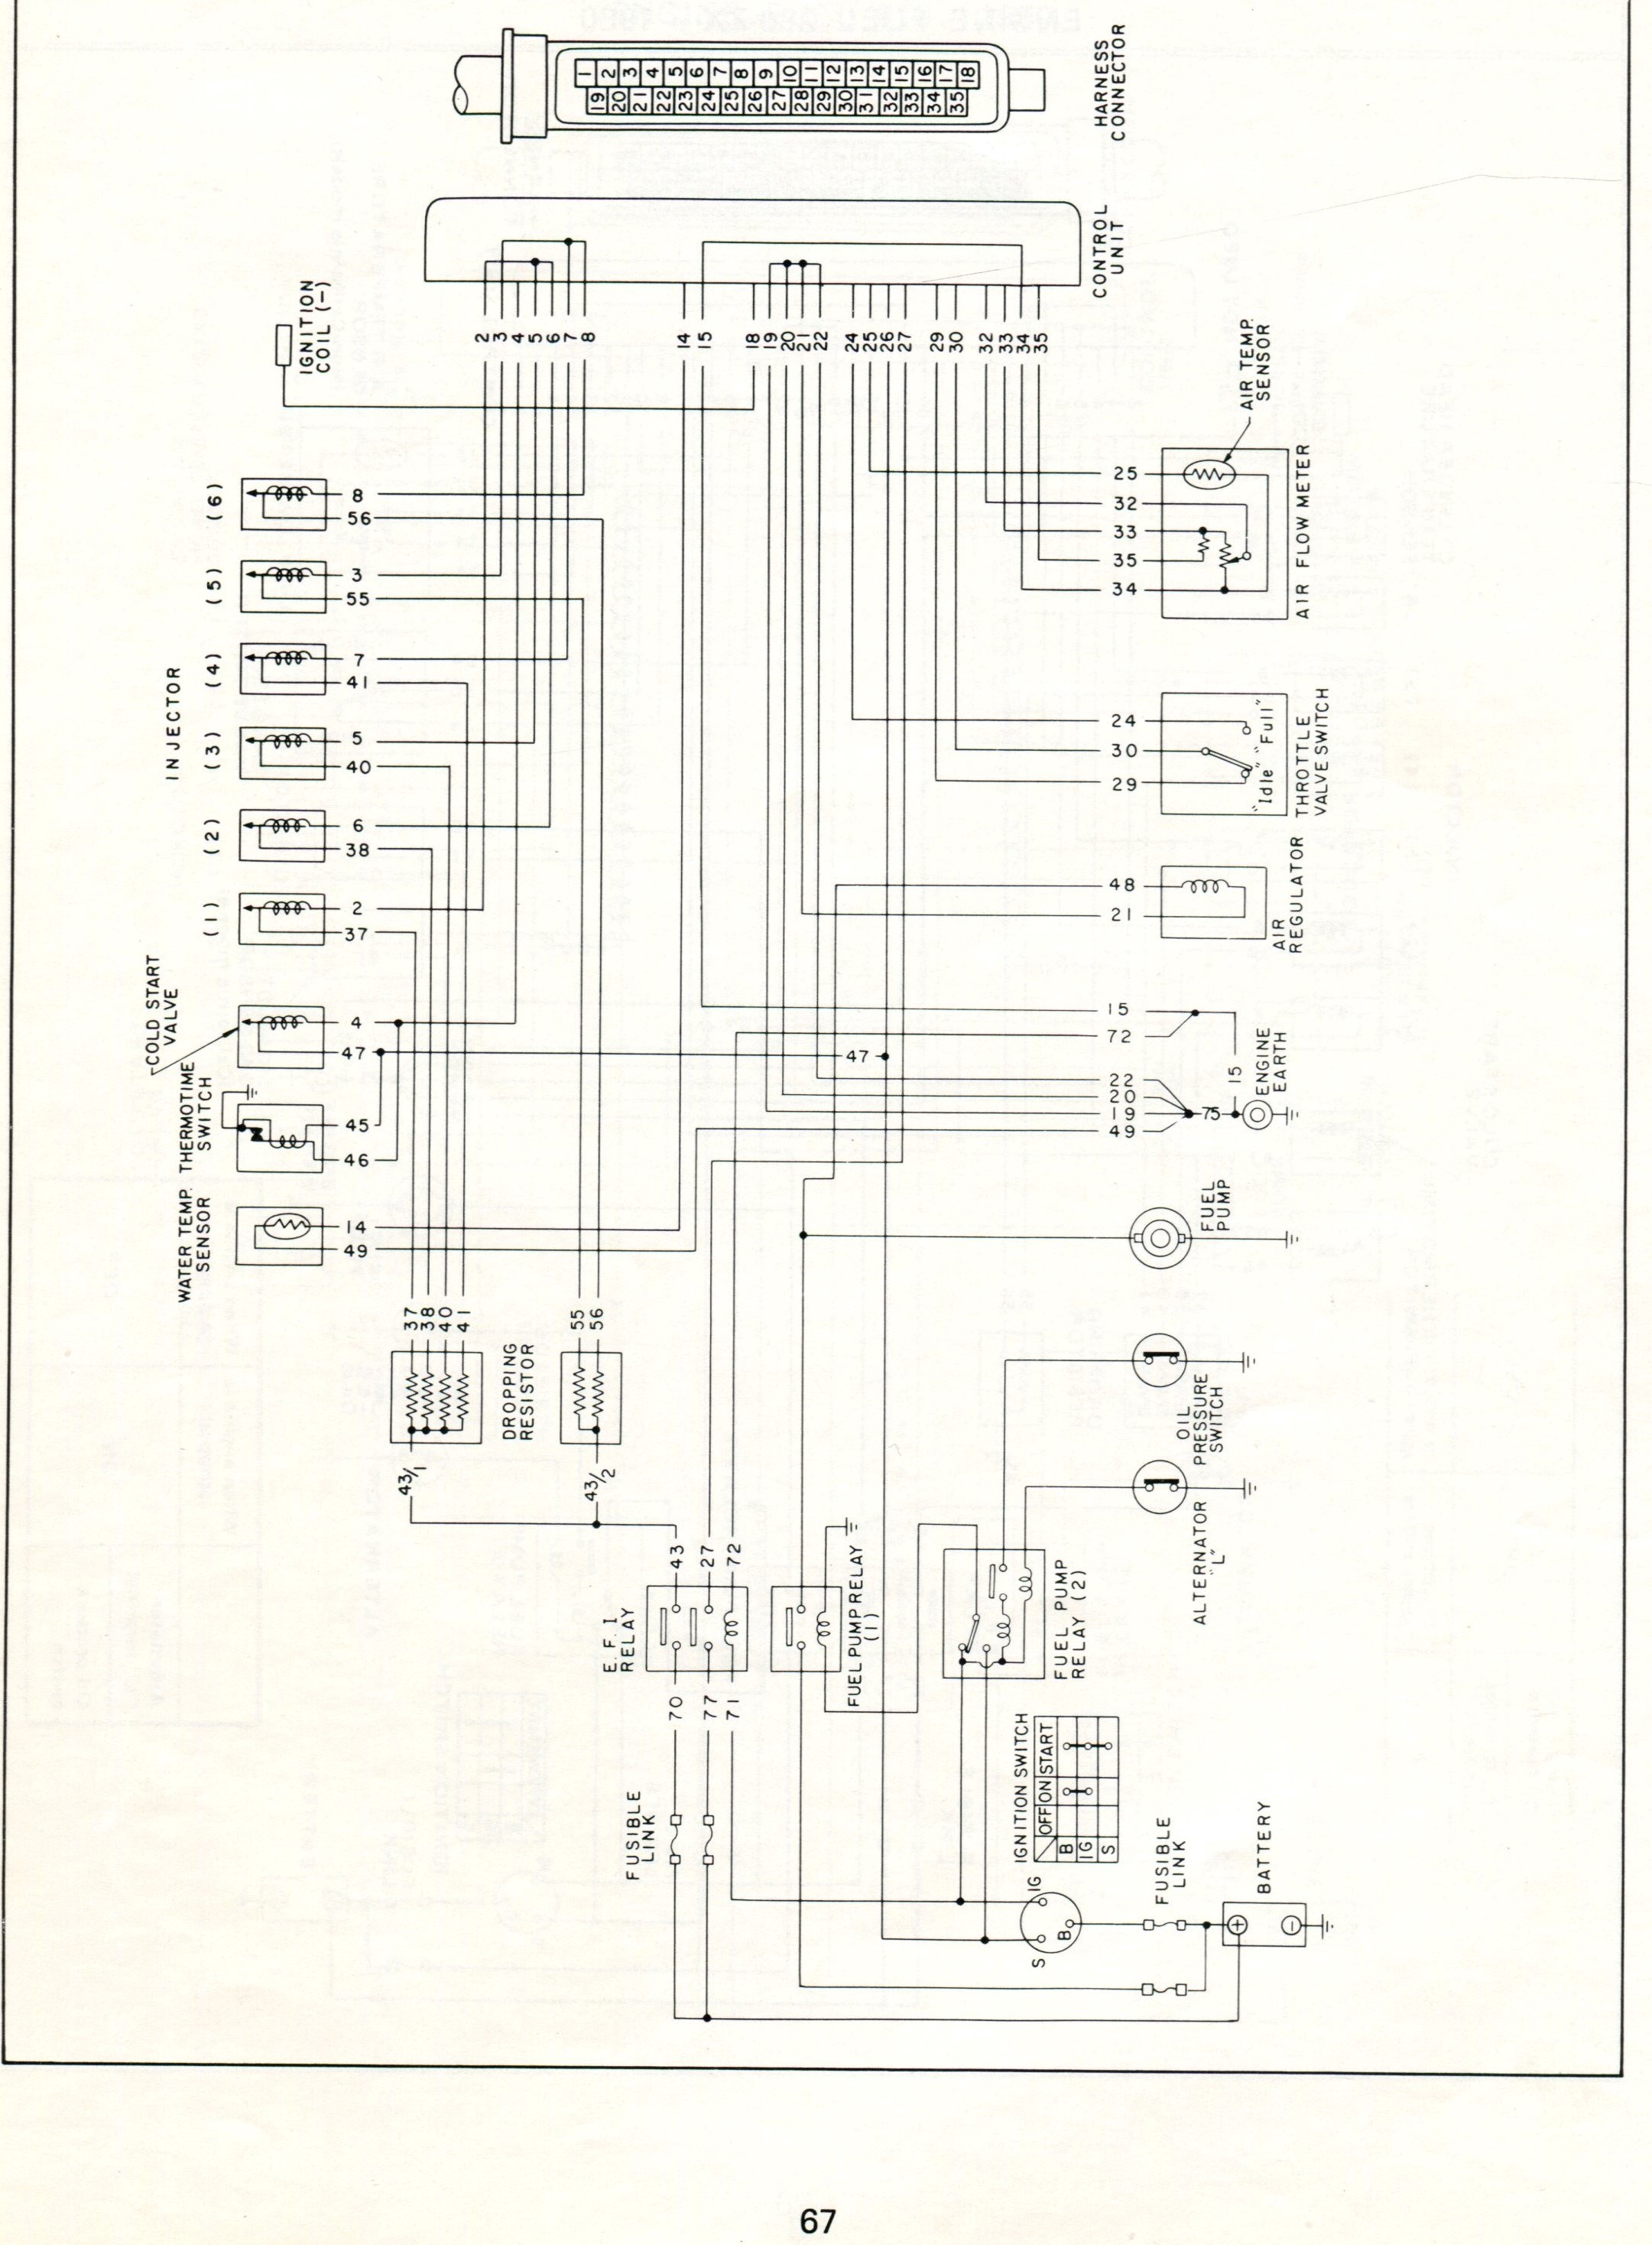 Datsun Electronic Fuel Injection - Wiring Diagrams